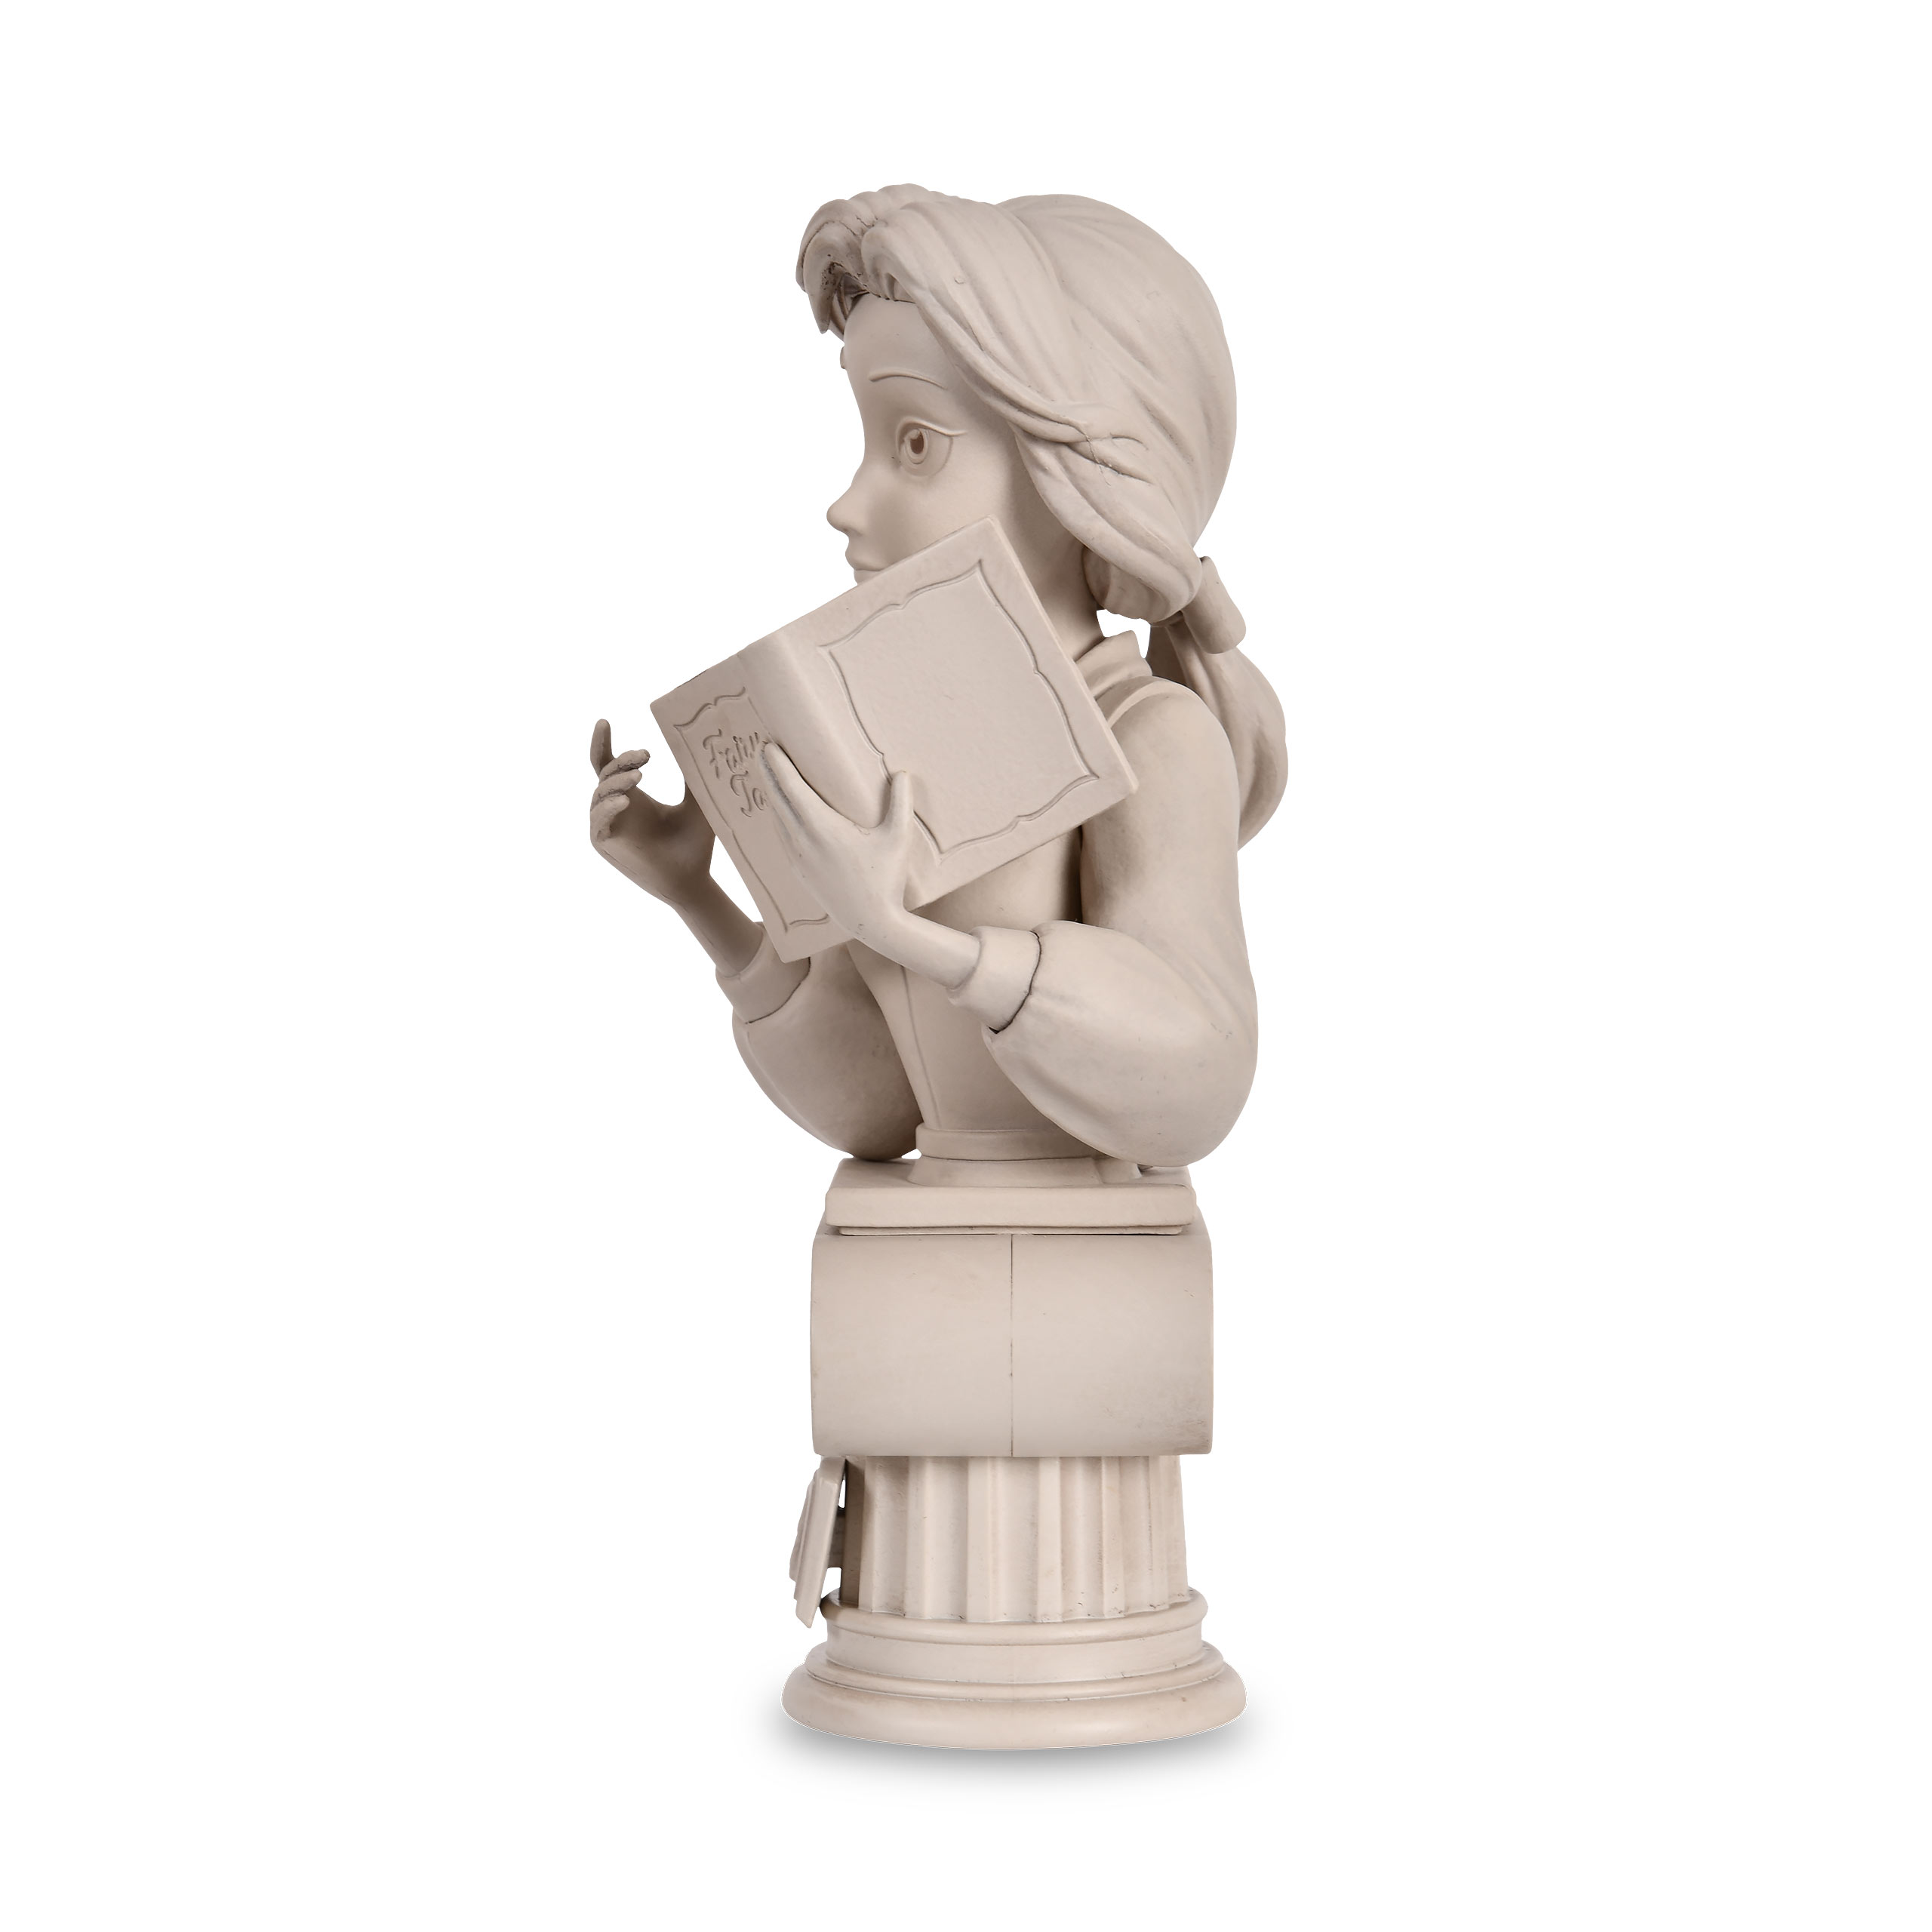 Beauty and the Beast - Belle Disney Princess Bust